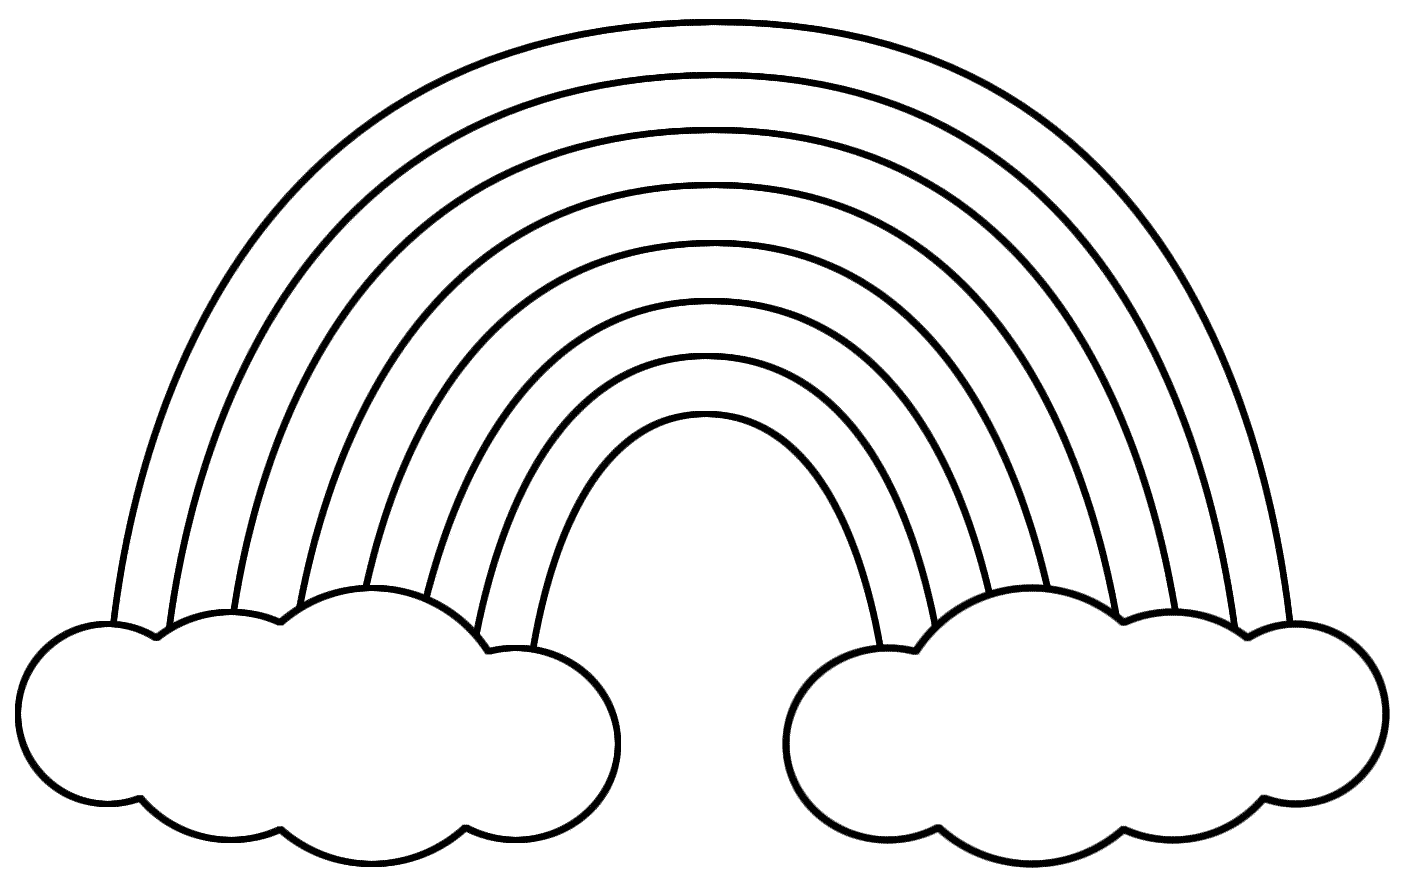 Rainbow black and white coloring page free cliparts - Clipartix